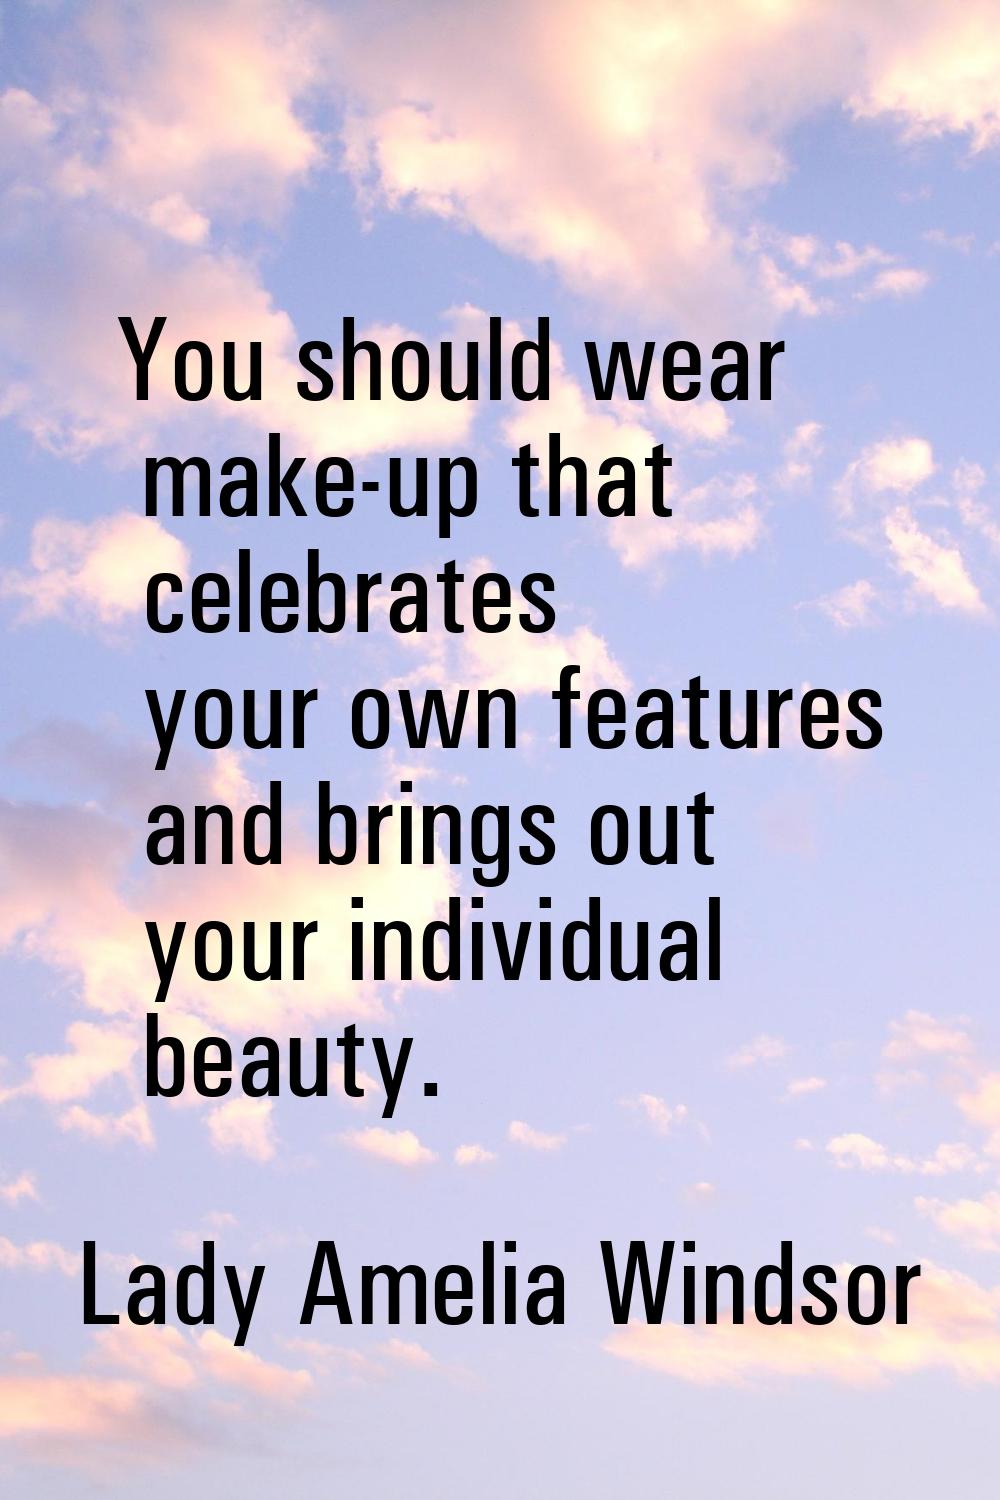 You should wear make-up that celebrates your own features and brings out your individual beauty.